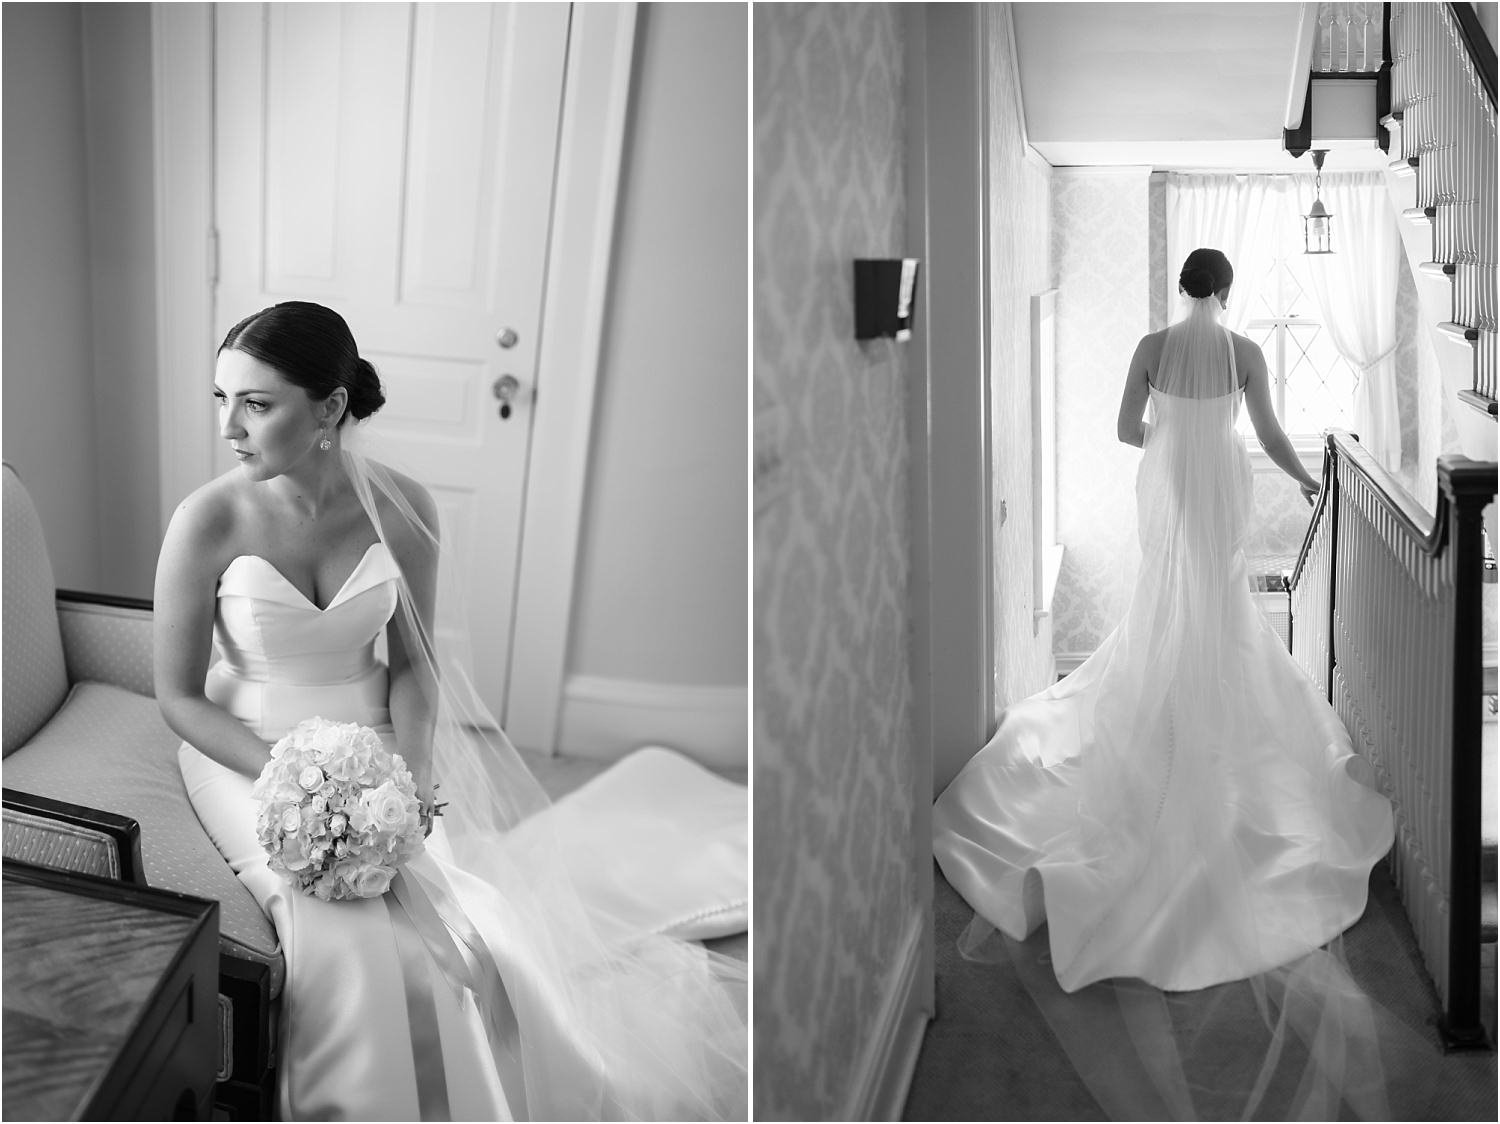  A bride looks out the window and walks down the stairs to do portraits on her wedding day.  